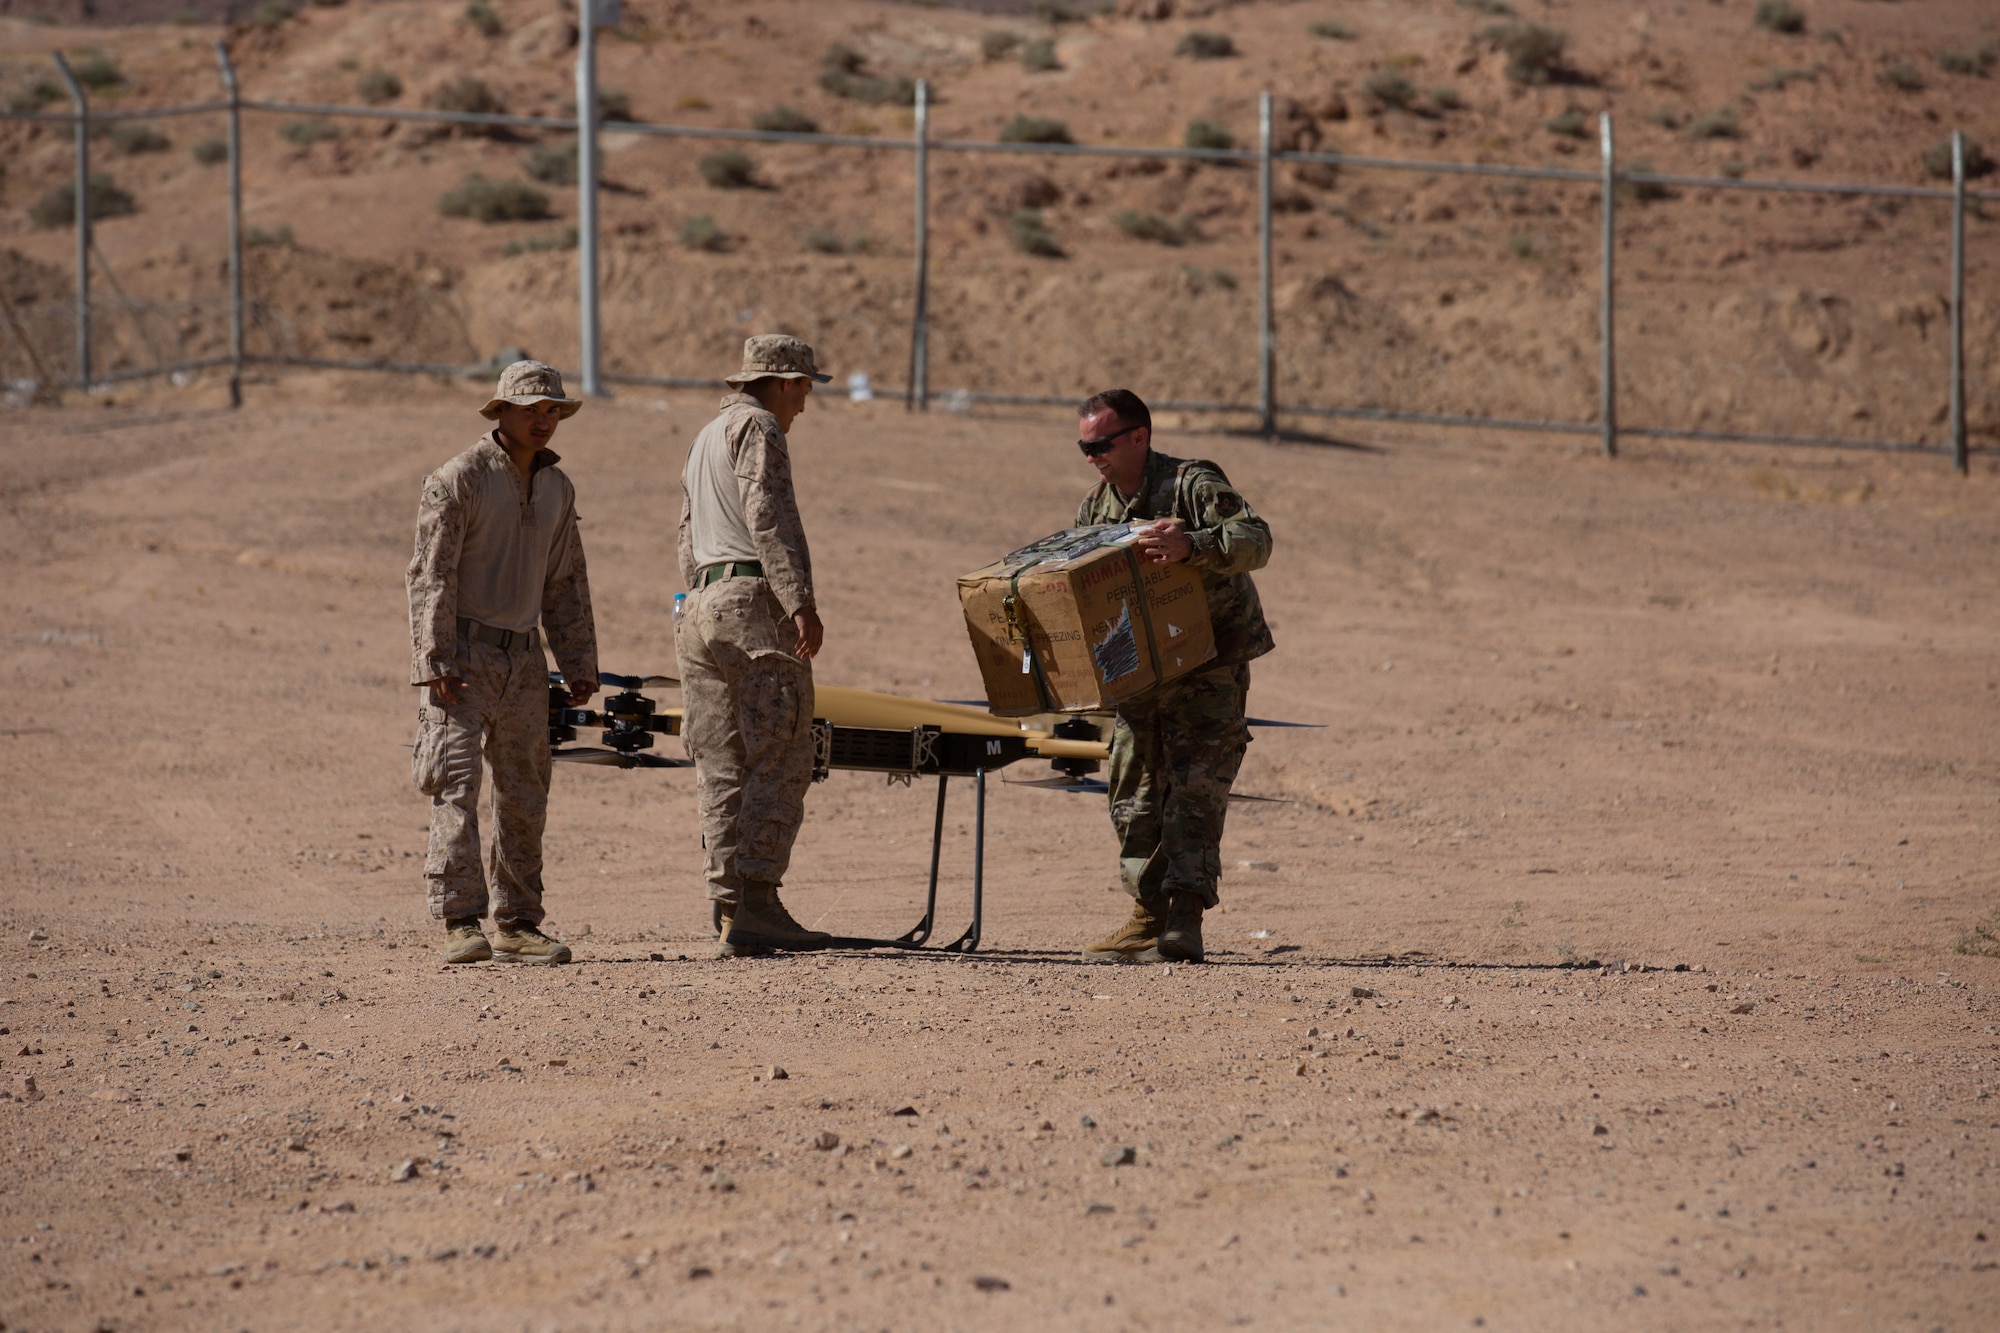 U.S. Air Force and Marine members attach cargo to an UAV